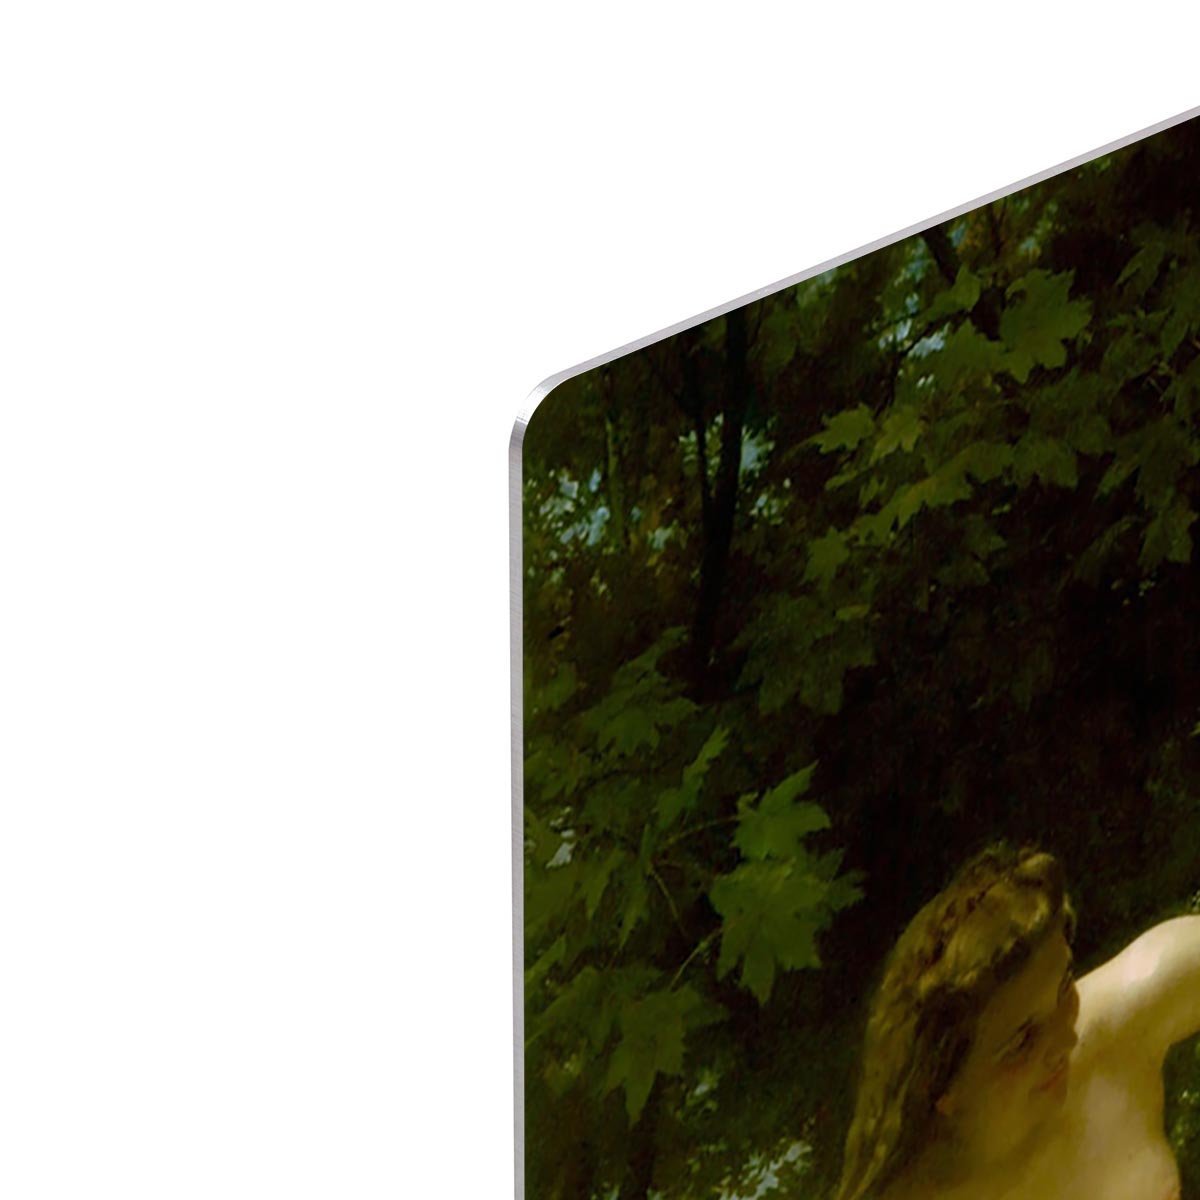 Nymphs and Satyr By Bouguereau HD Metal Print